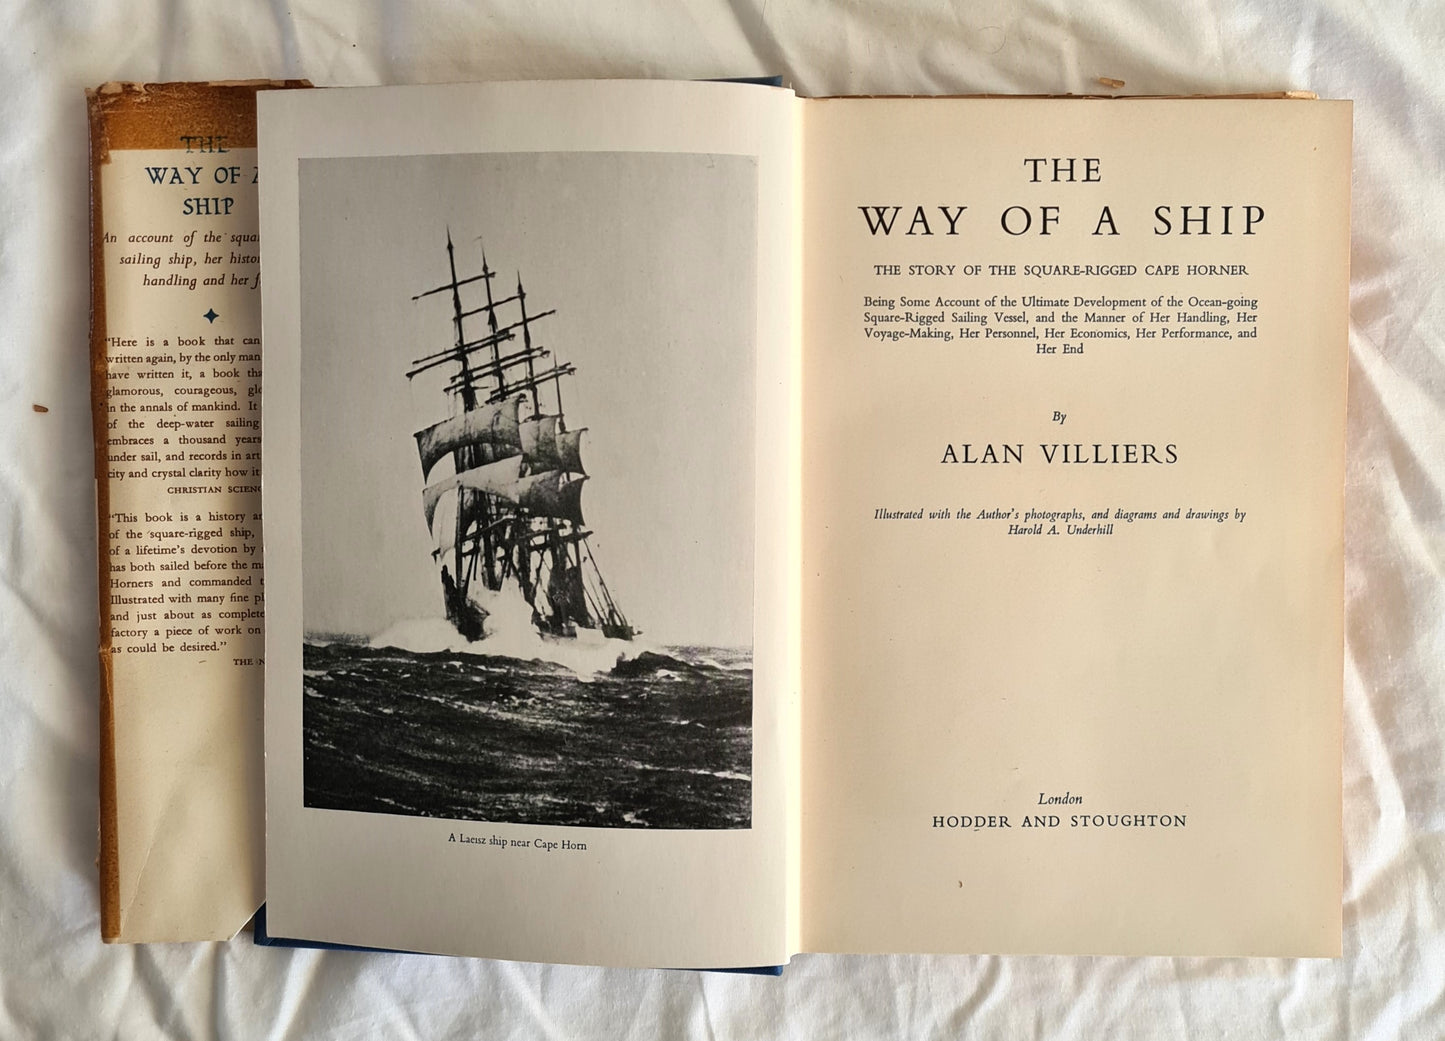 The Way of a Ship by Alan Villiers